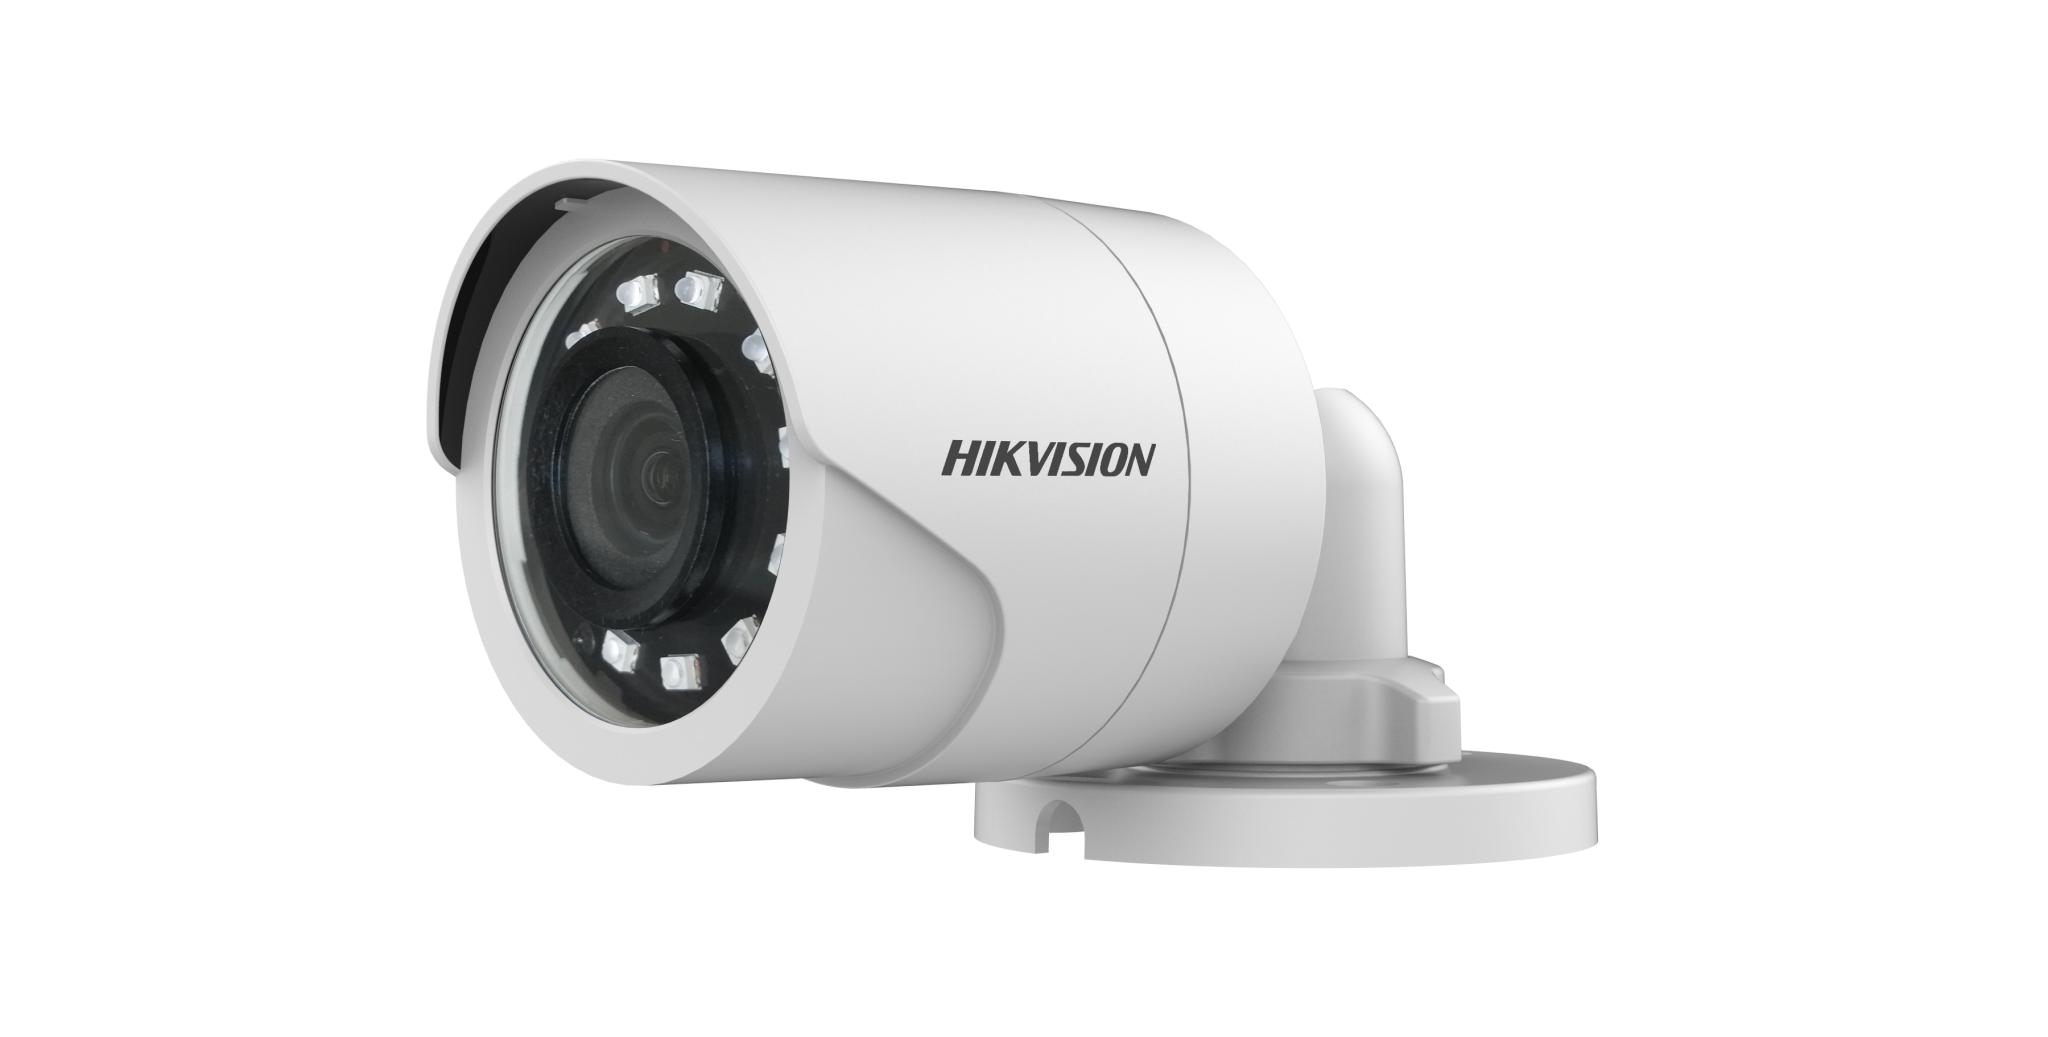 Camera supraveghere Hikvision, Turbo HD bullet, DS-2CE16D0T-IRF(2.8mm) (C)